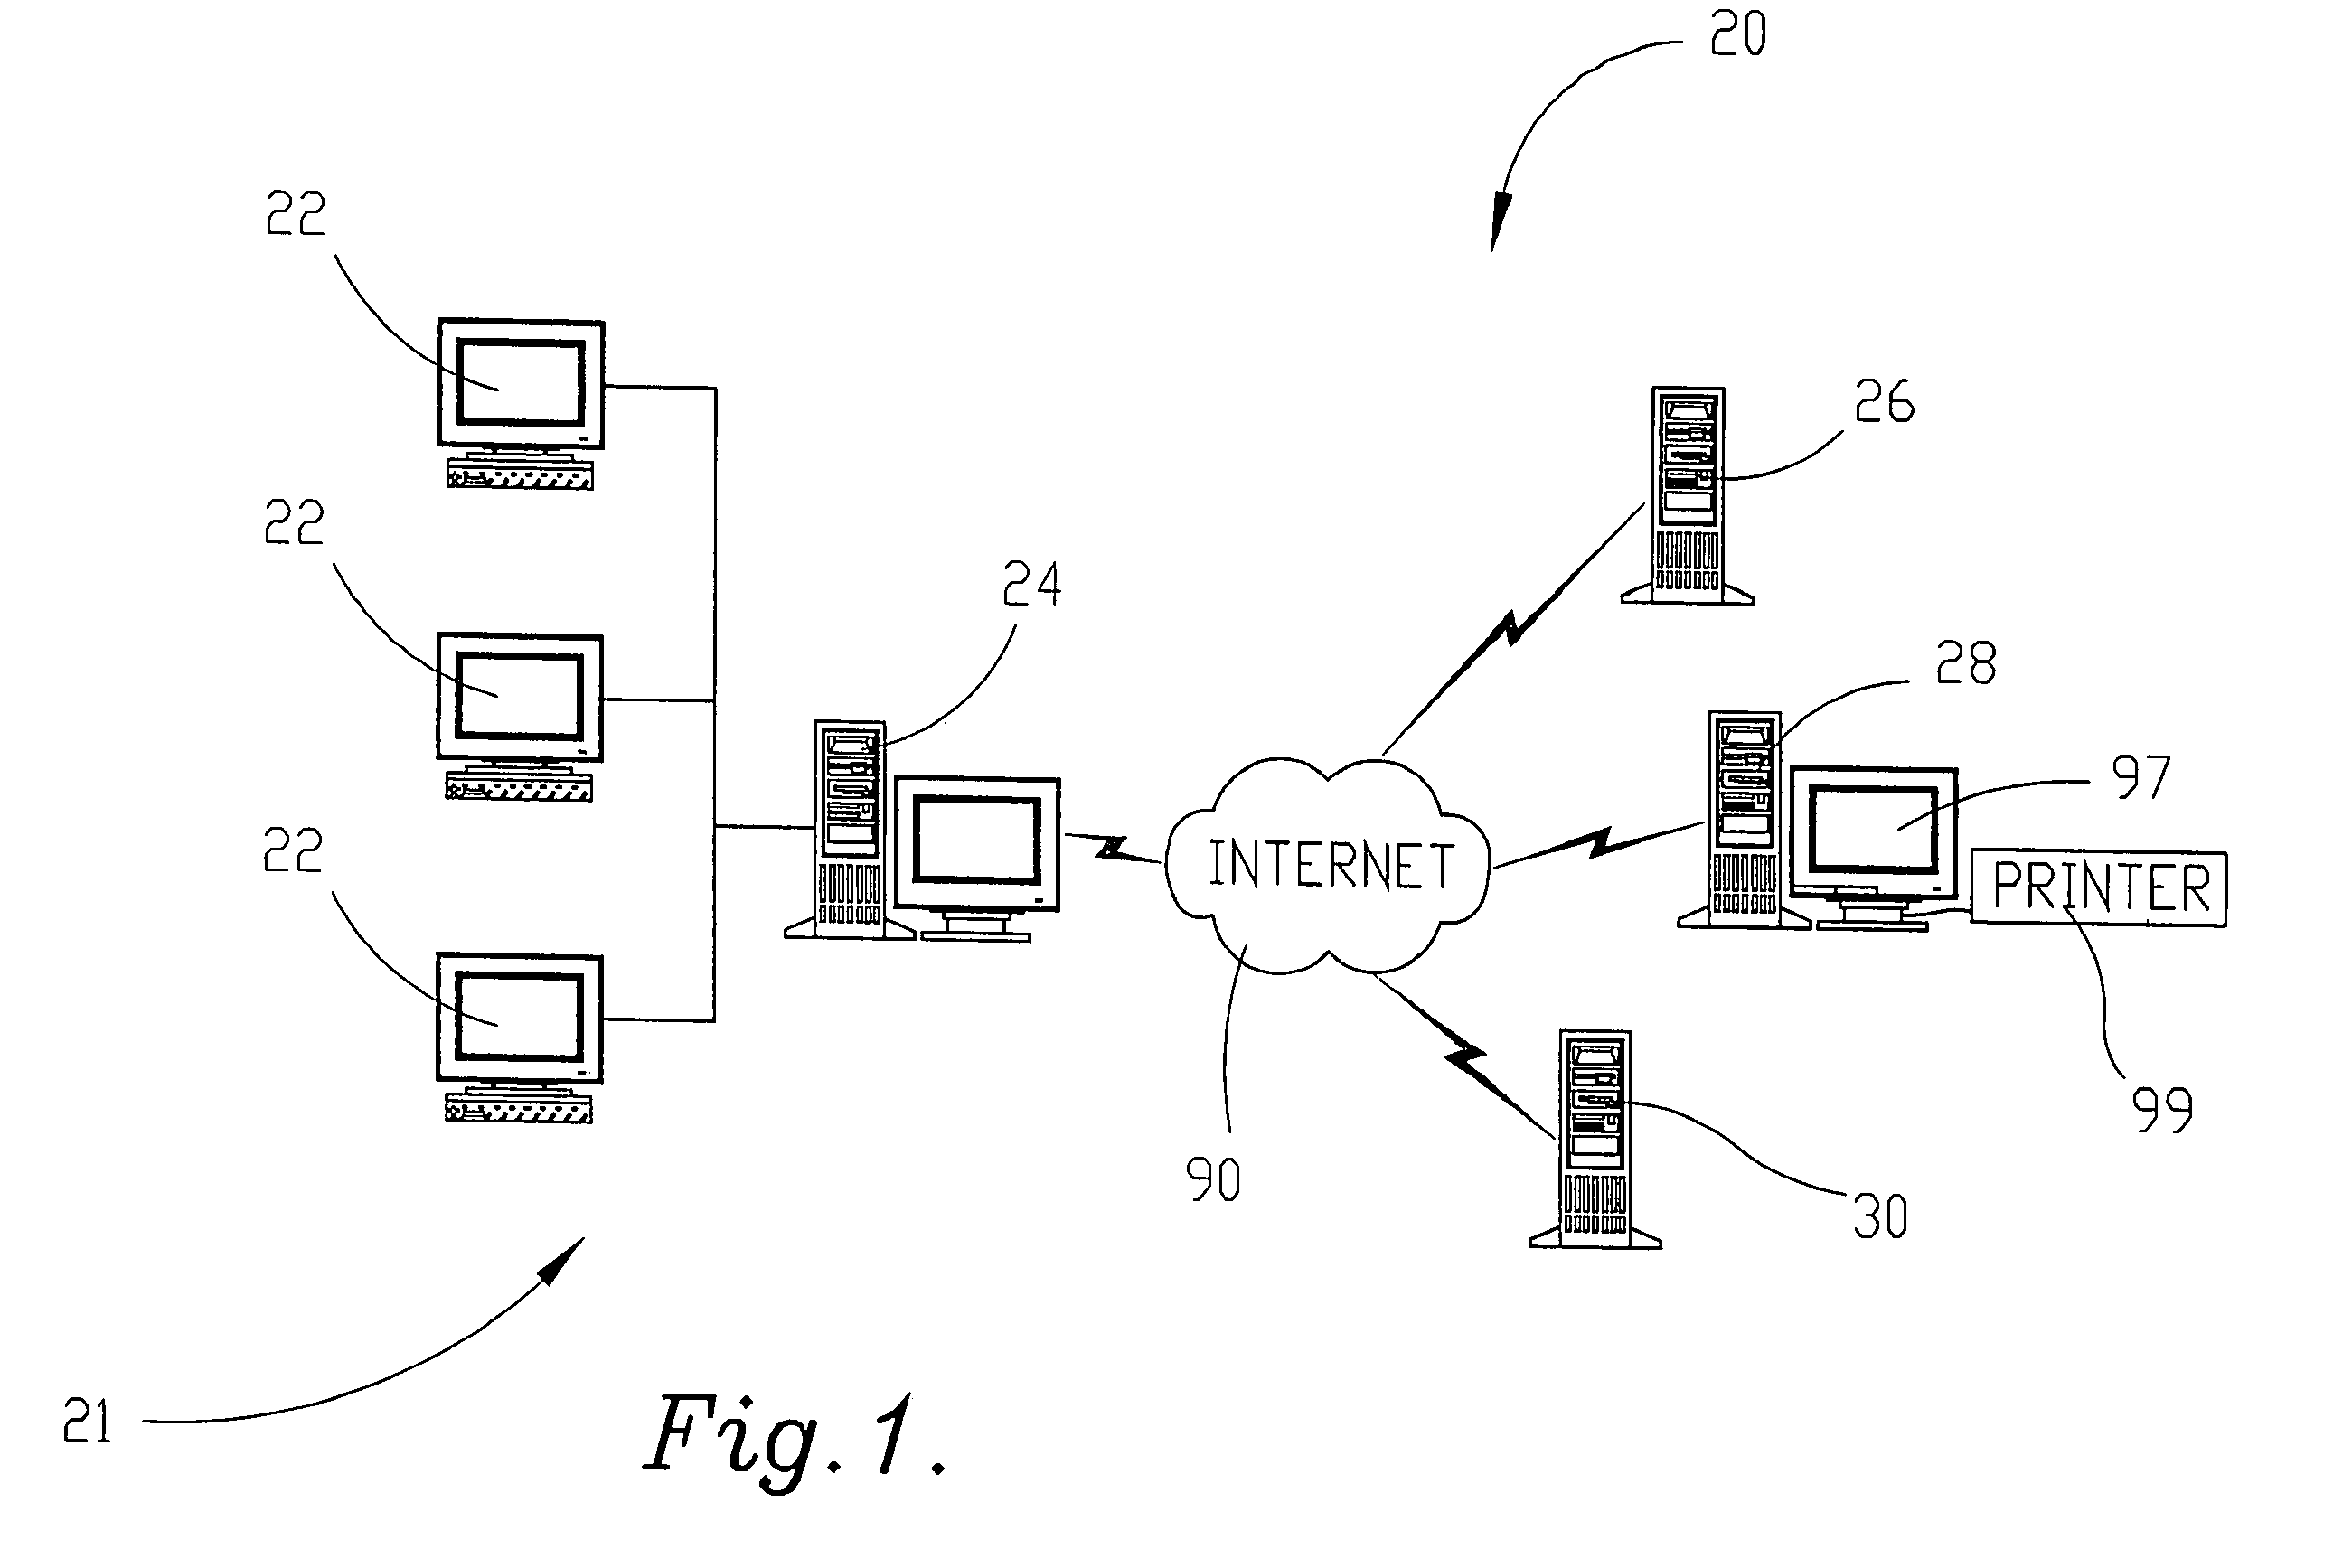 Computer network having context sensitive and interactive multimedia applications and controls, forming dynamic user interfaces on local computer terminals